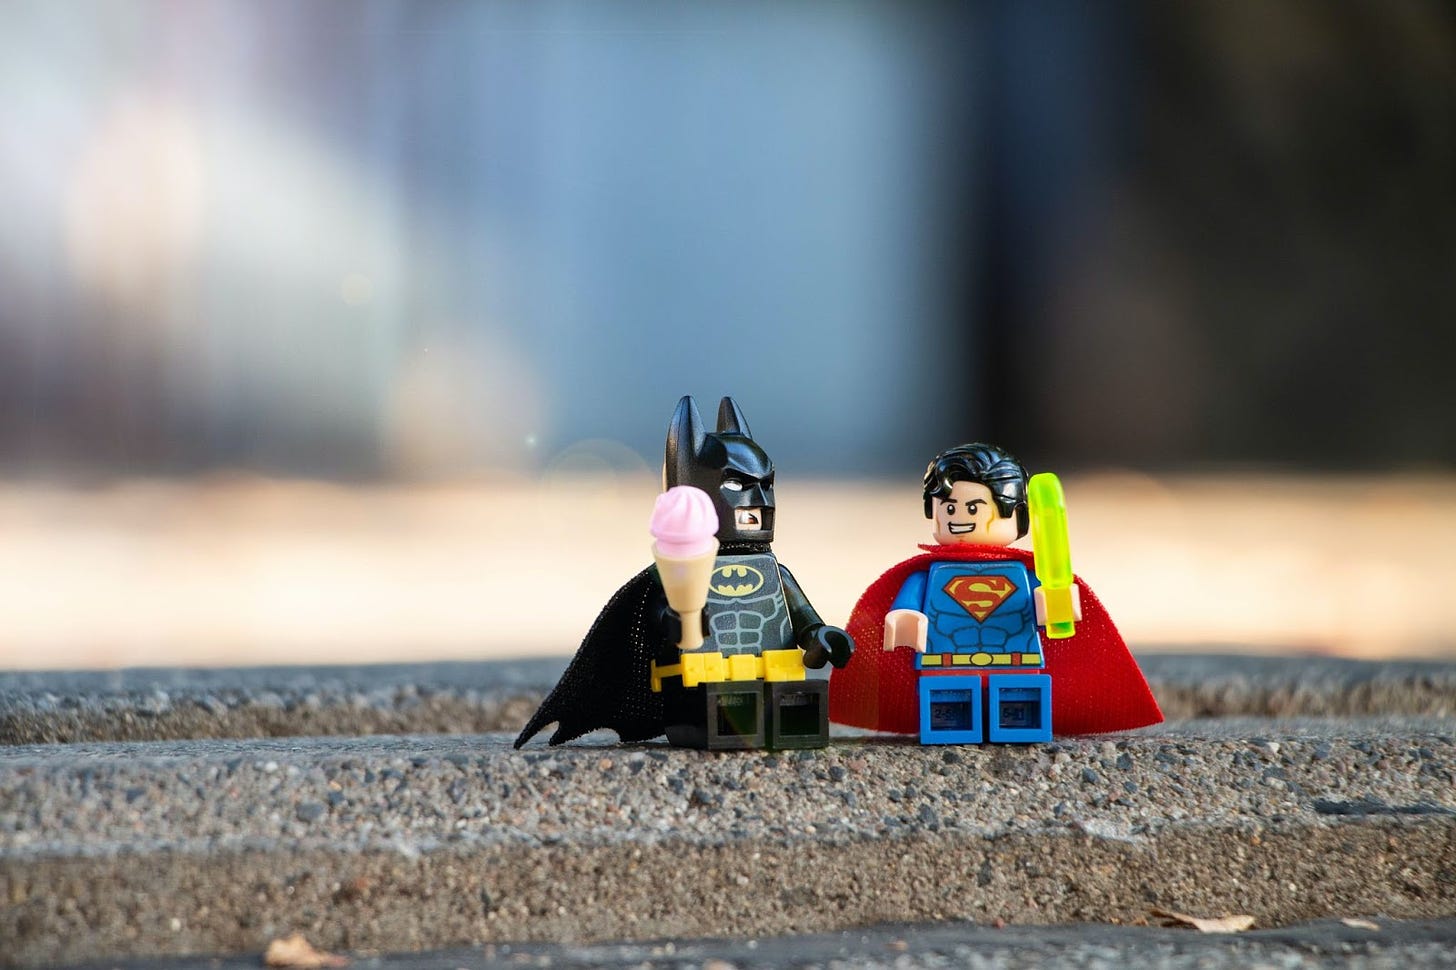 Two superheroes having a snack and going for a walk